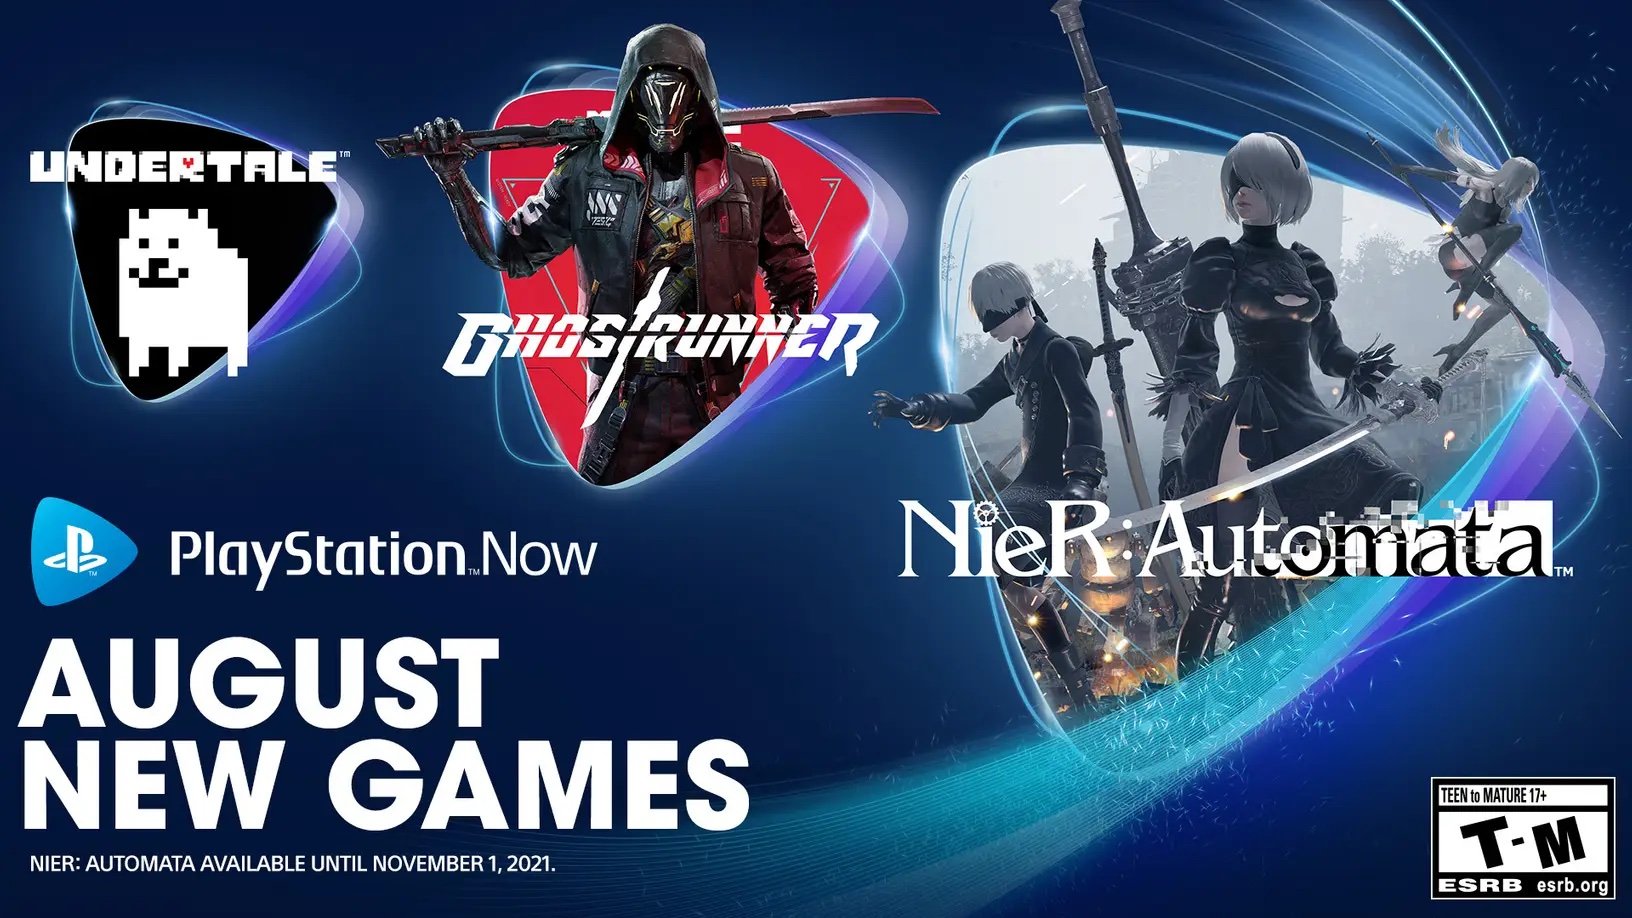 Now Games Lineup Officially Revealed For August 2021